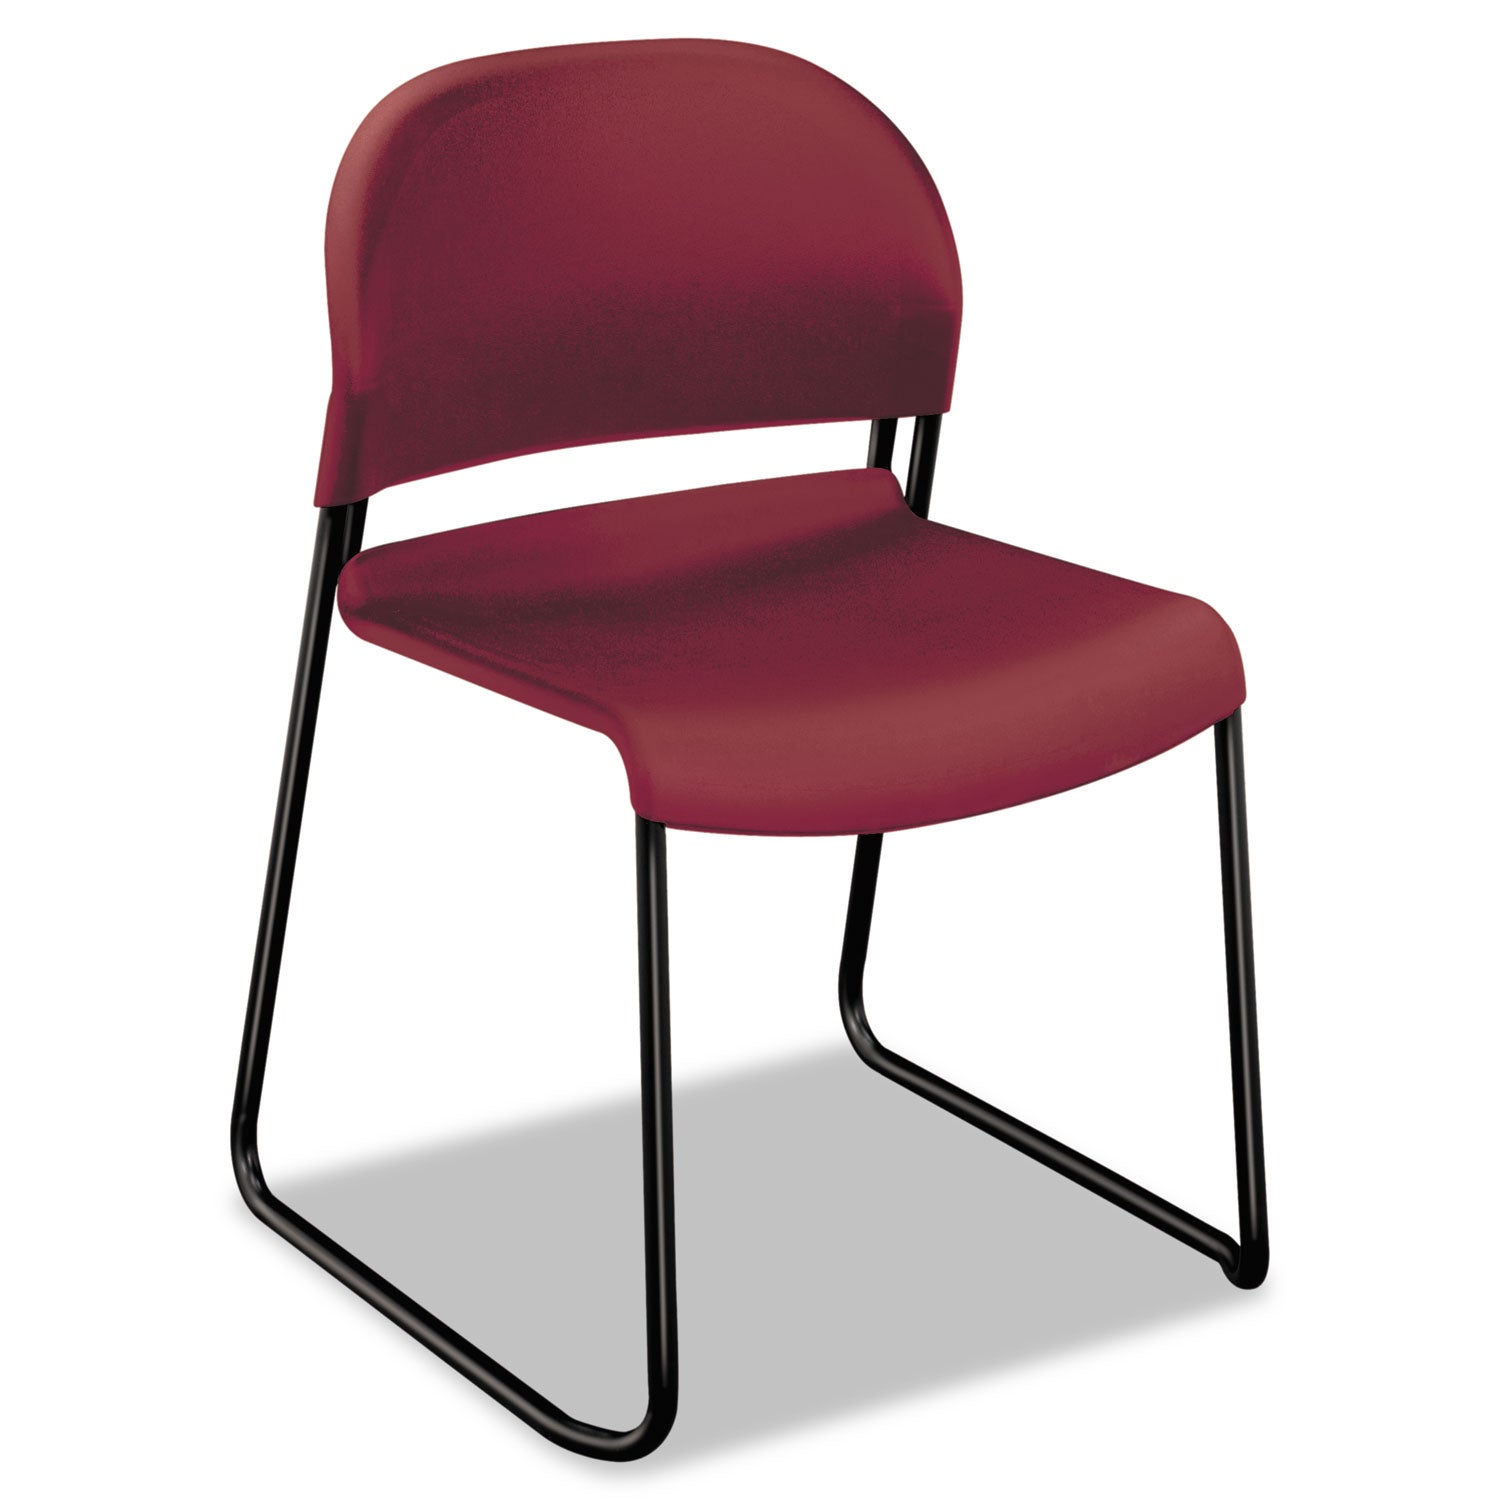 GuestStacker High Density Chairs, Supports 300 lb, 17.5" Seat Height, Mulberry Seat, Mulberry Back, Black Base, 4/Carton - 